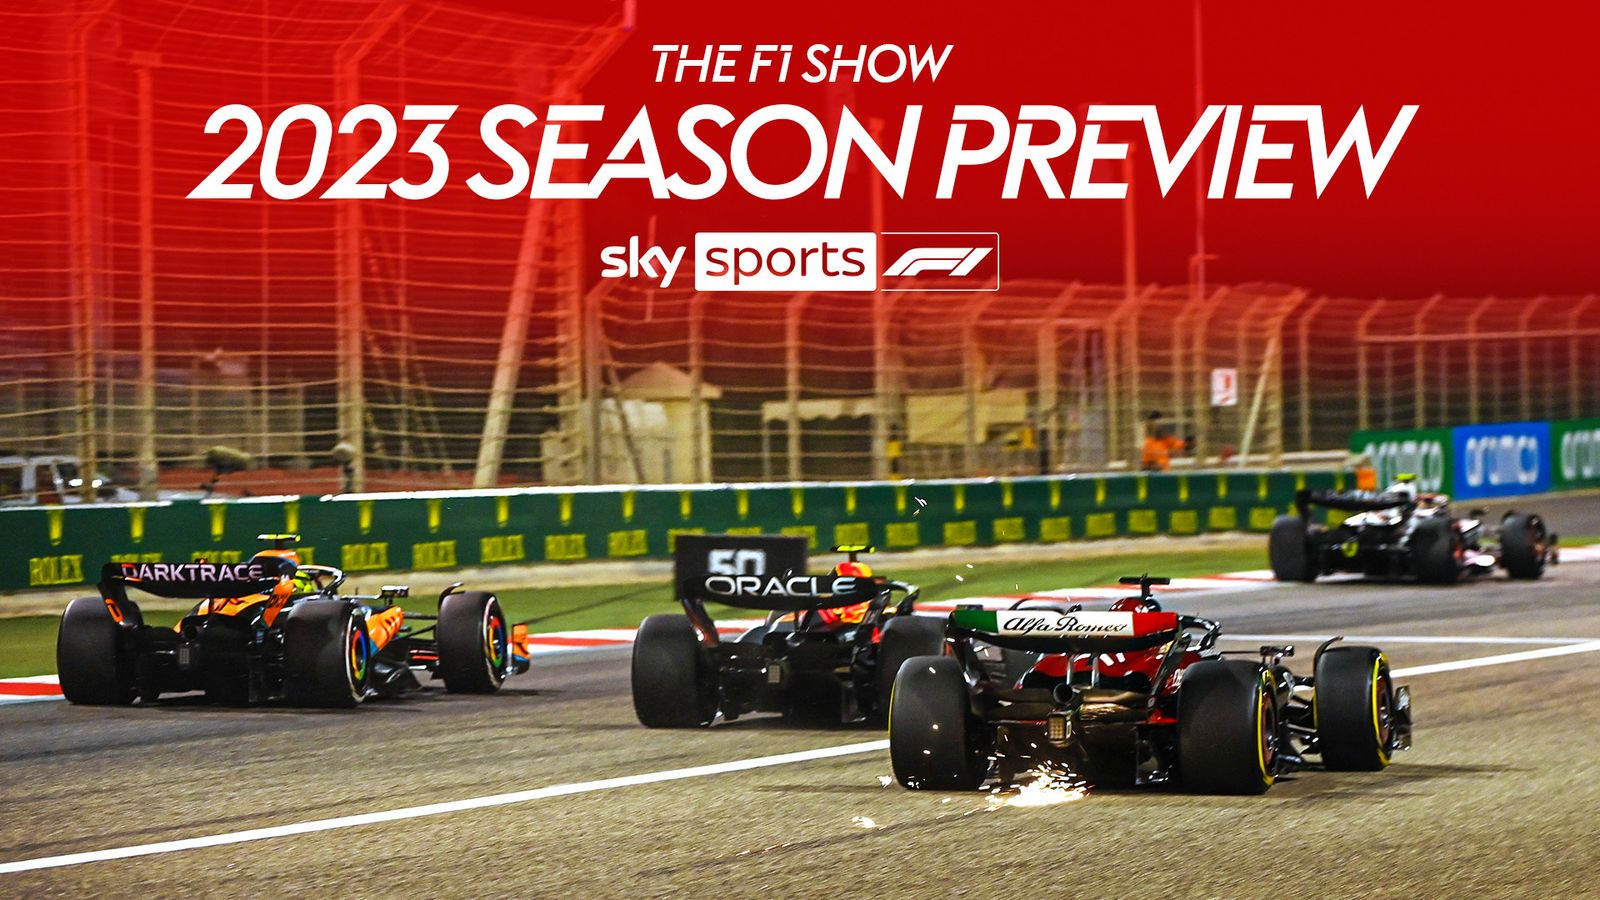 2023 season PREVIEW! 🤩 | The F1 Show | F1 News | Sky Sports